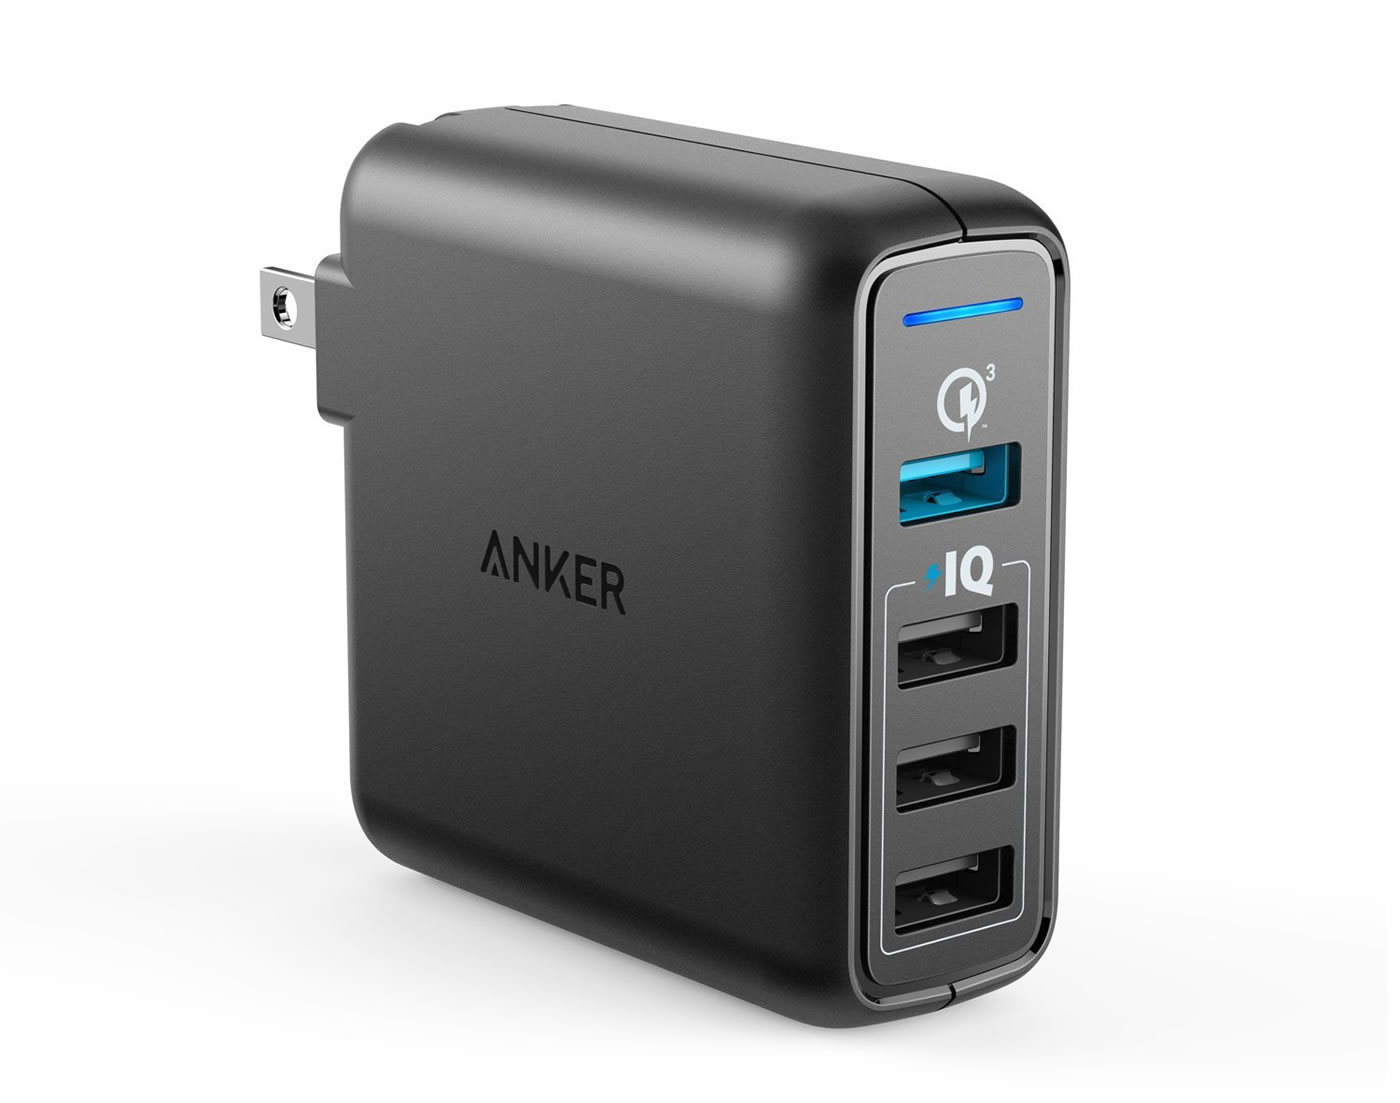 Anker、Quick Charge 3.0に対応した4ポートUSB充電器｢Anker PowerPort Speed 4｣を発売